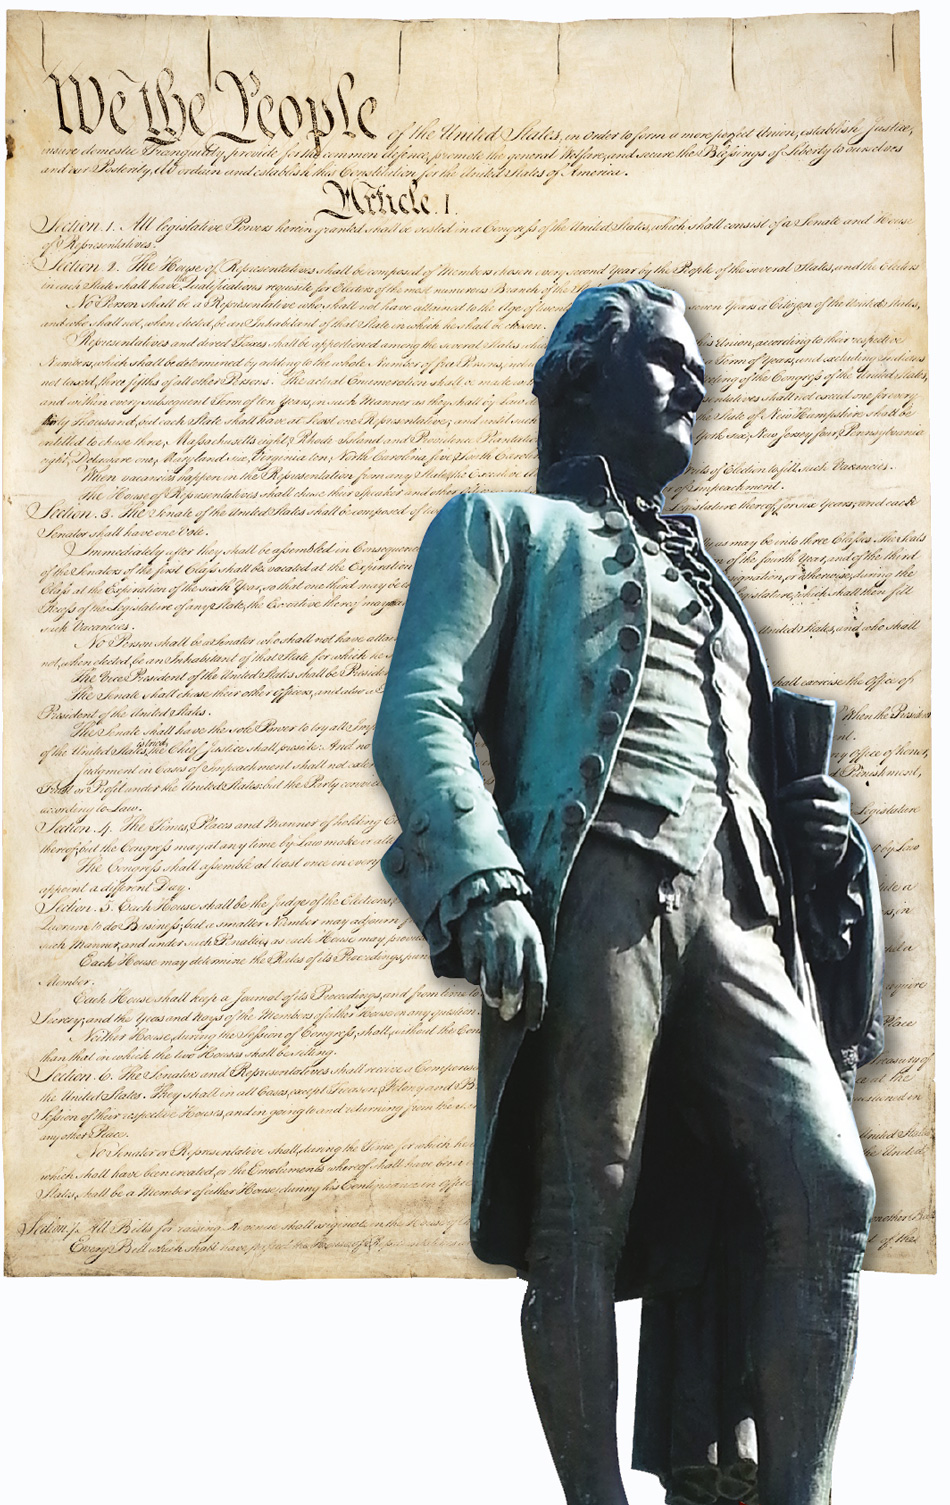 The original handwritten Constitution and statue of Alexander Hamilton in Paterson, New Jersey